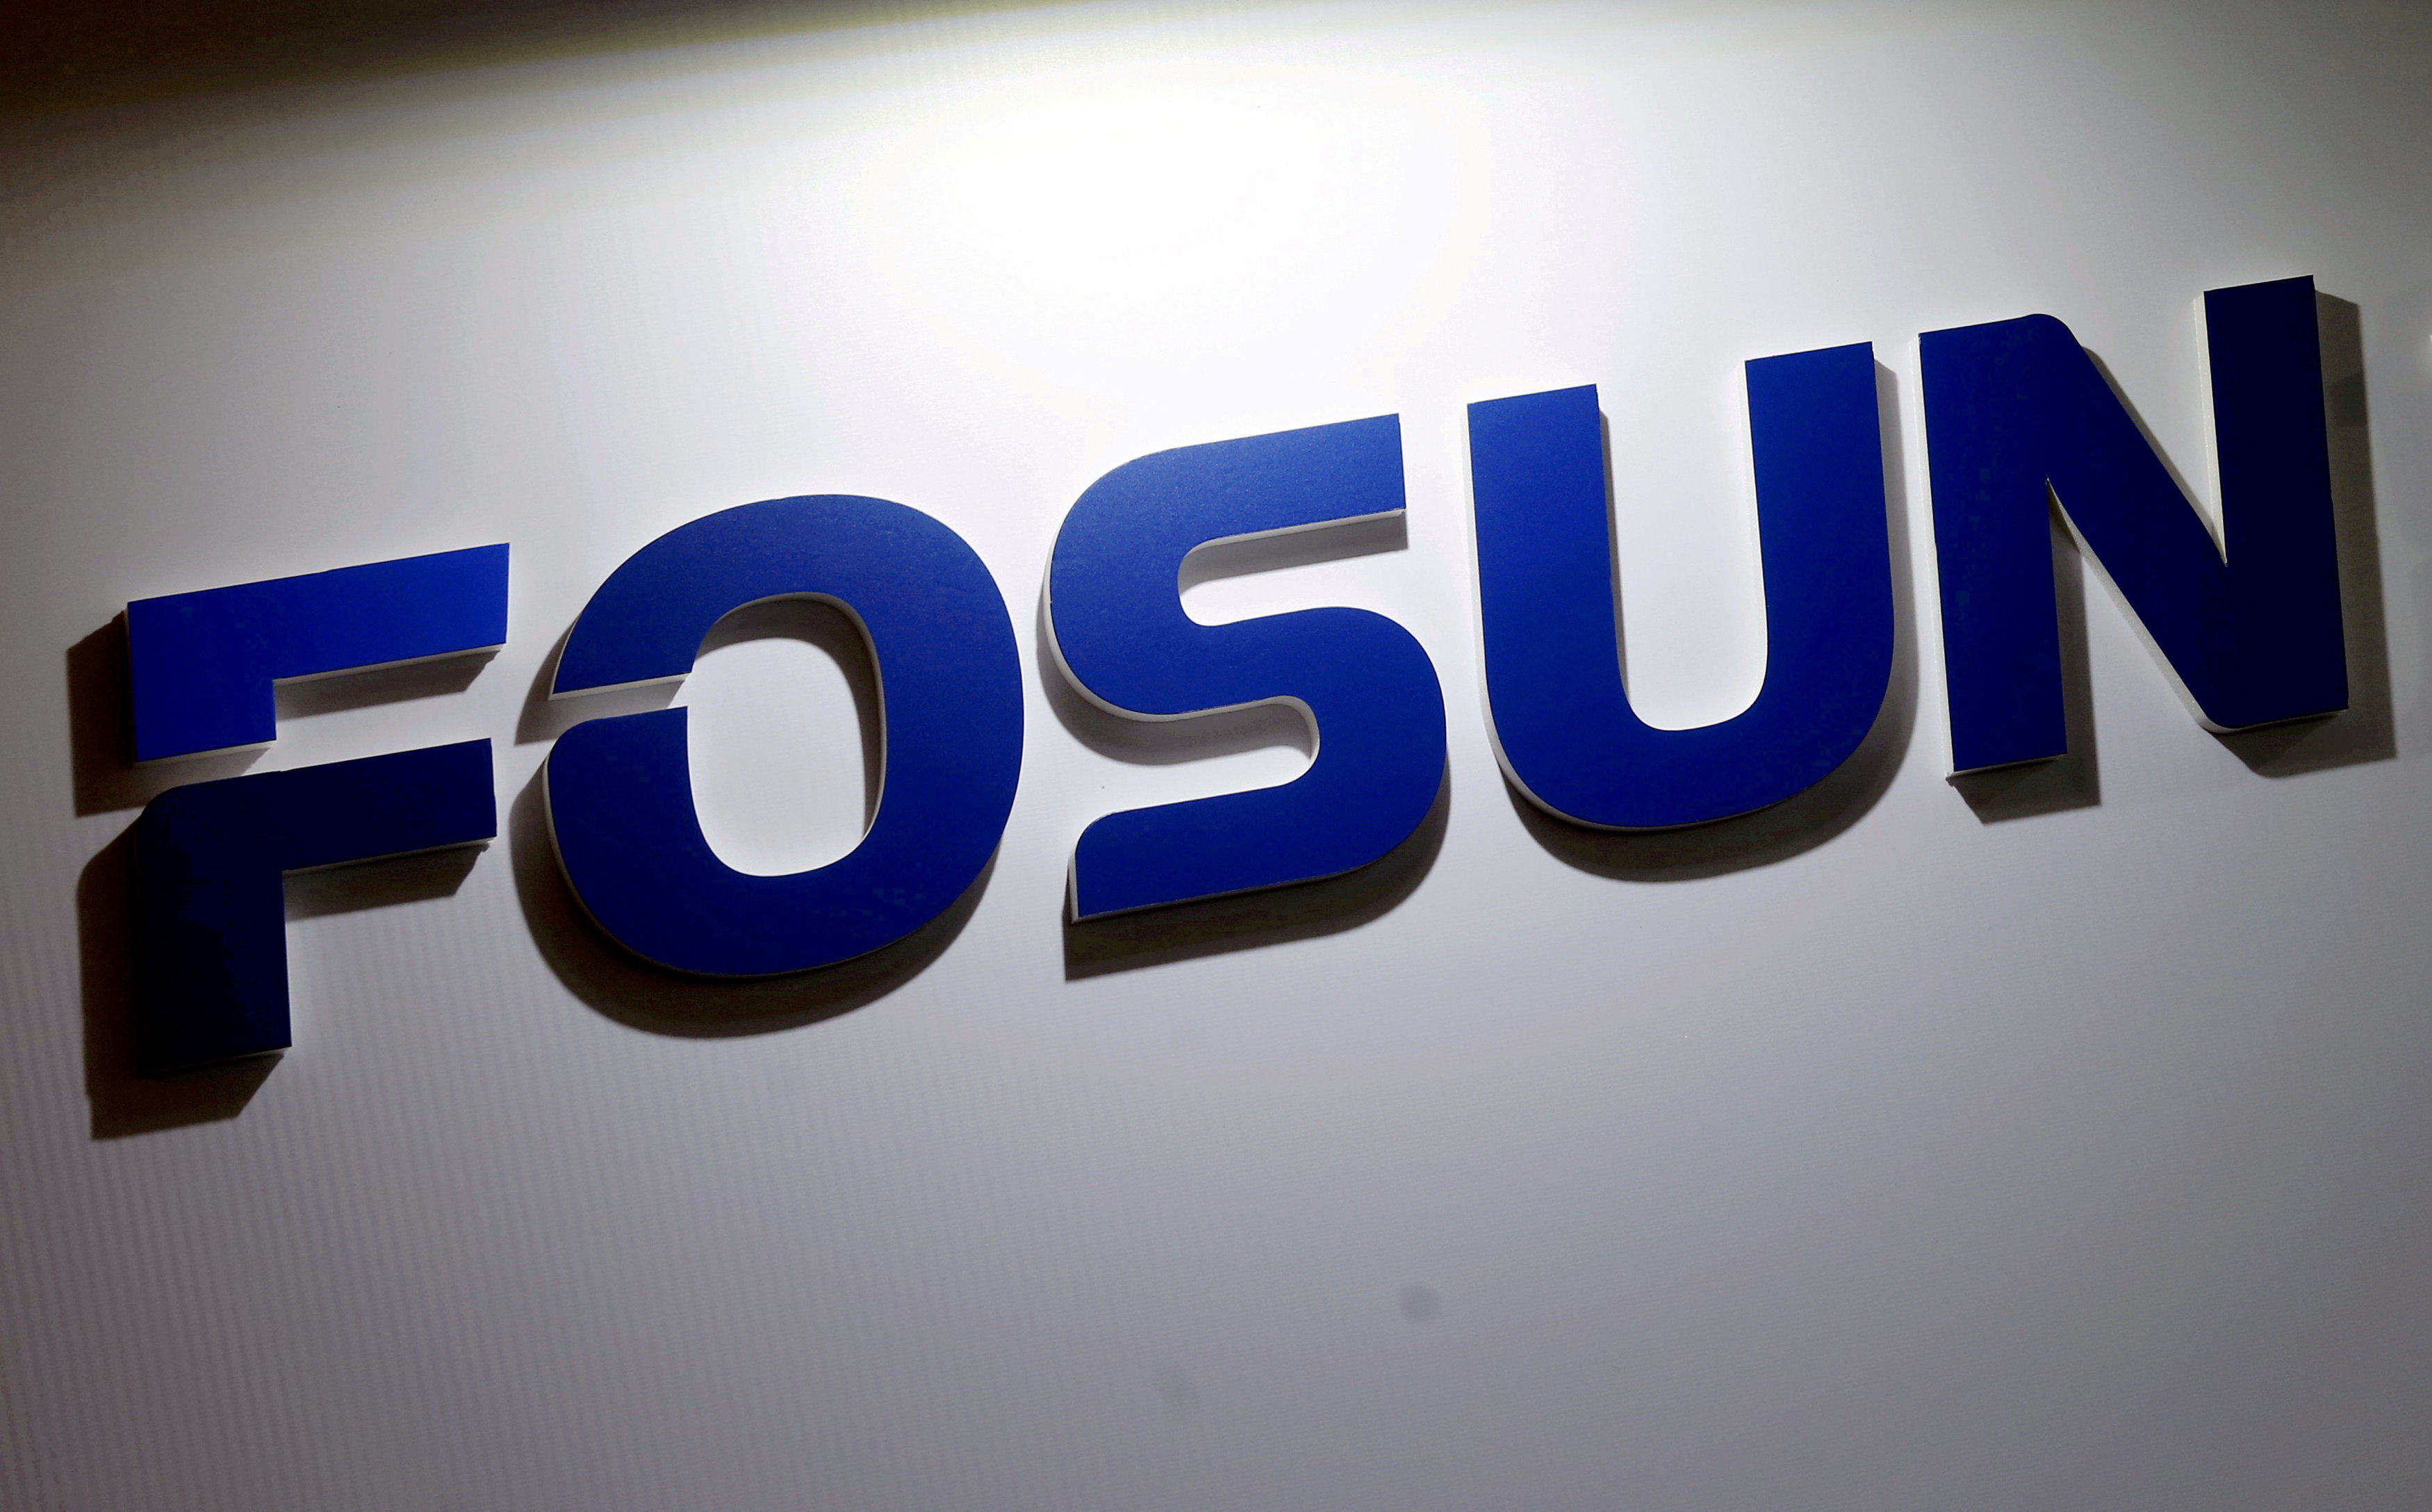 The logo of Fosun International is seen at a trade fair in Hong Kong in 2015. Photo: Reuters